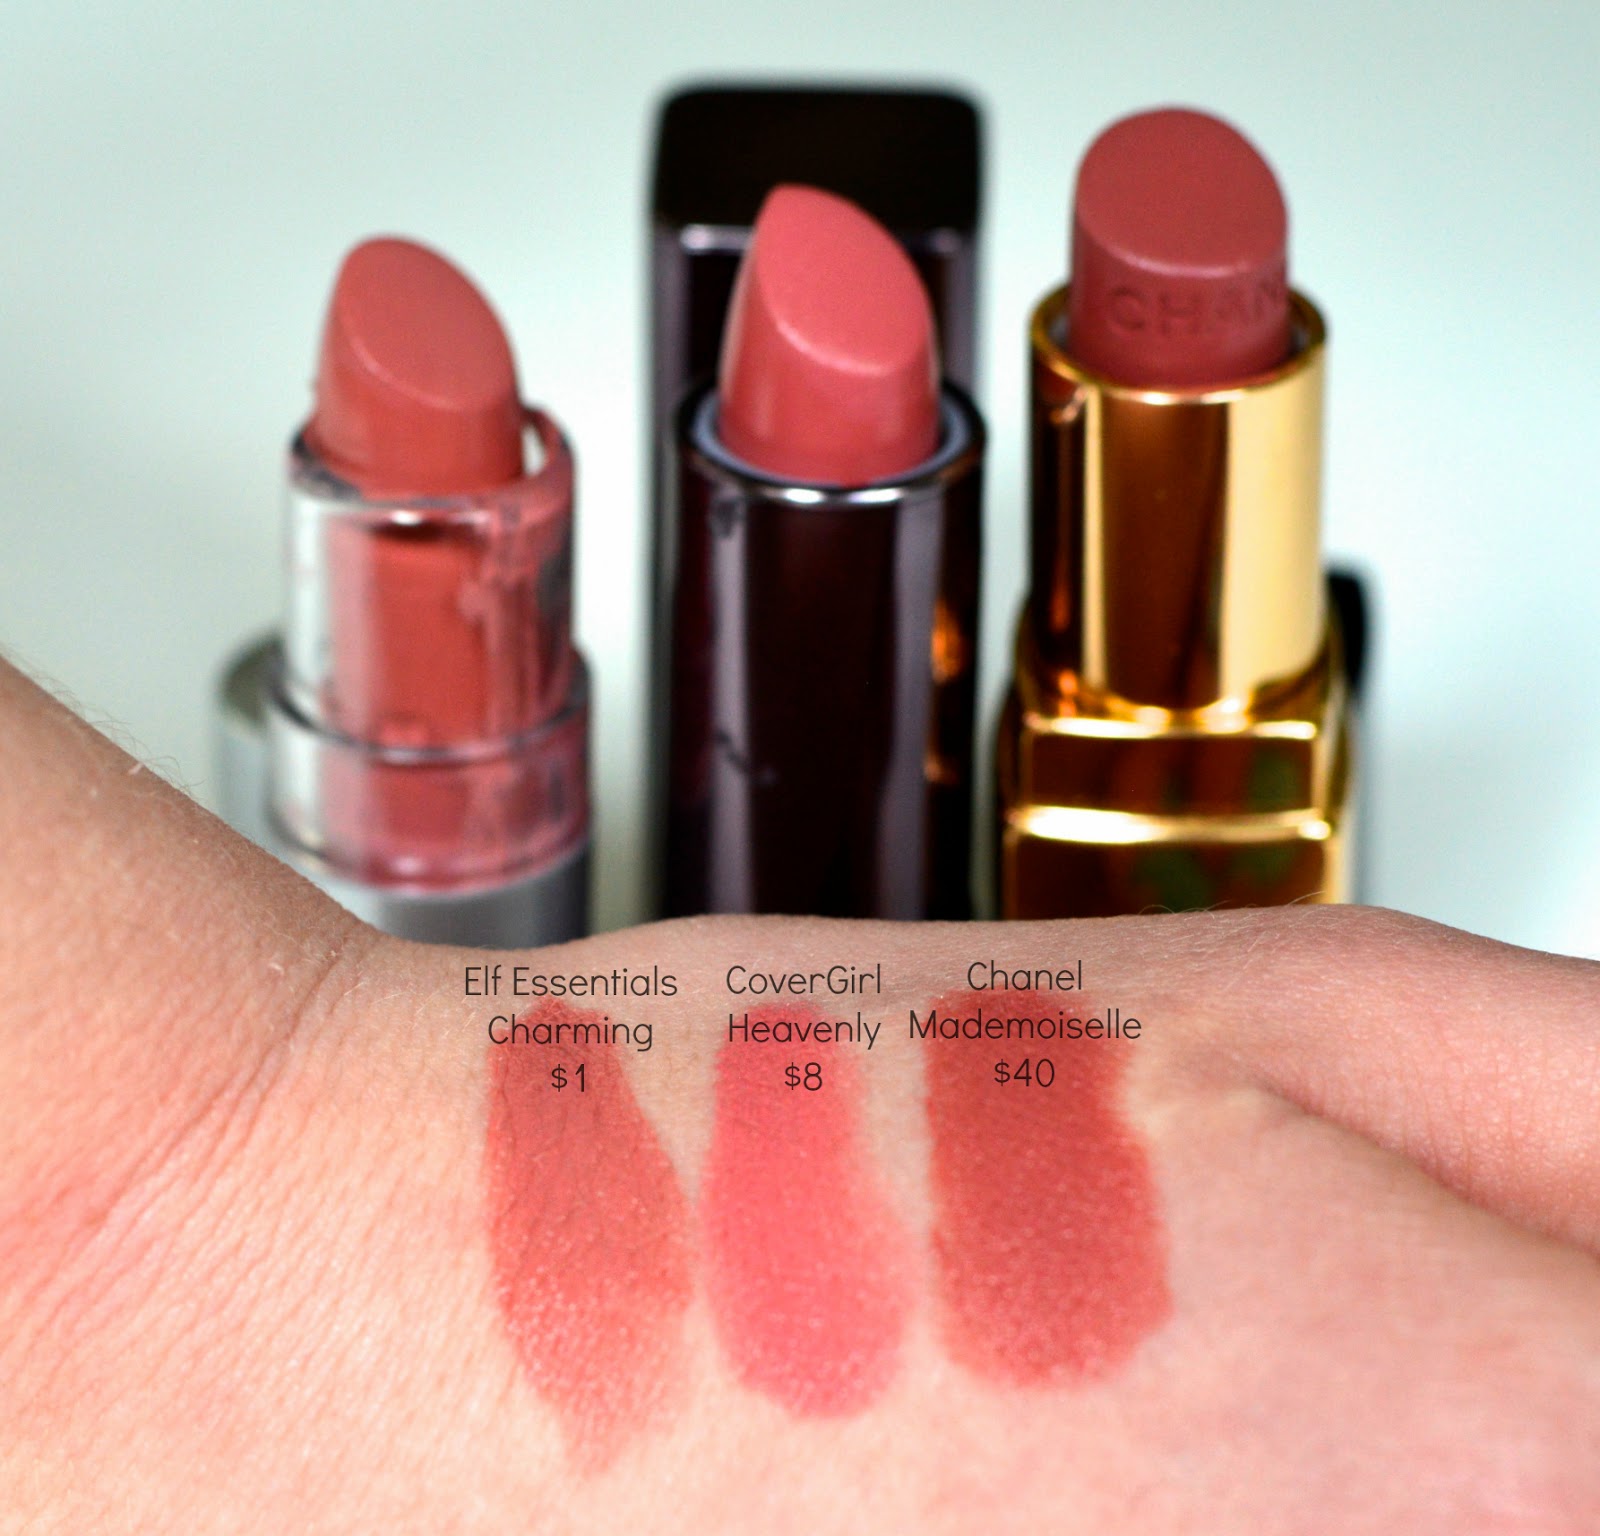 5 Chanel Rouge Coco Lipstick Mademoiselle Dupes